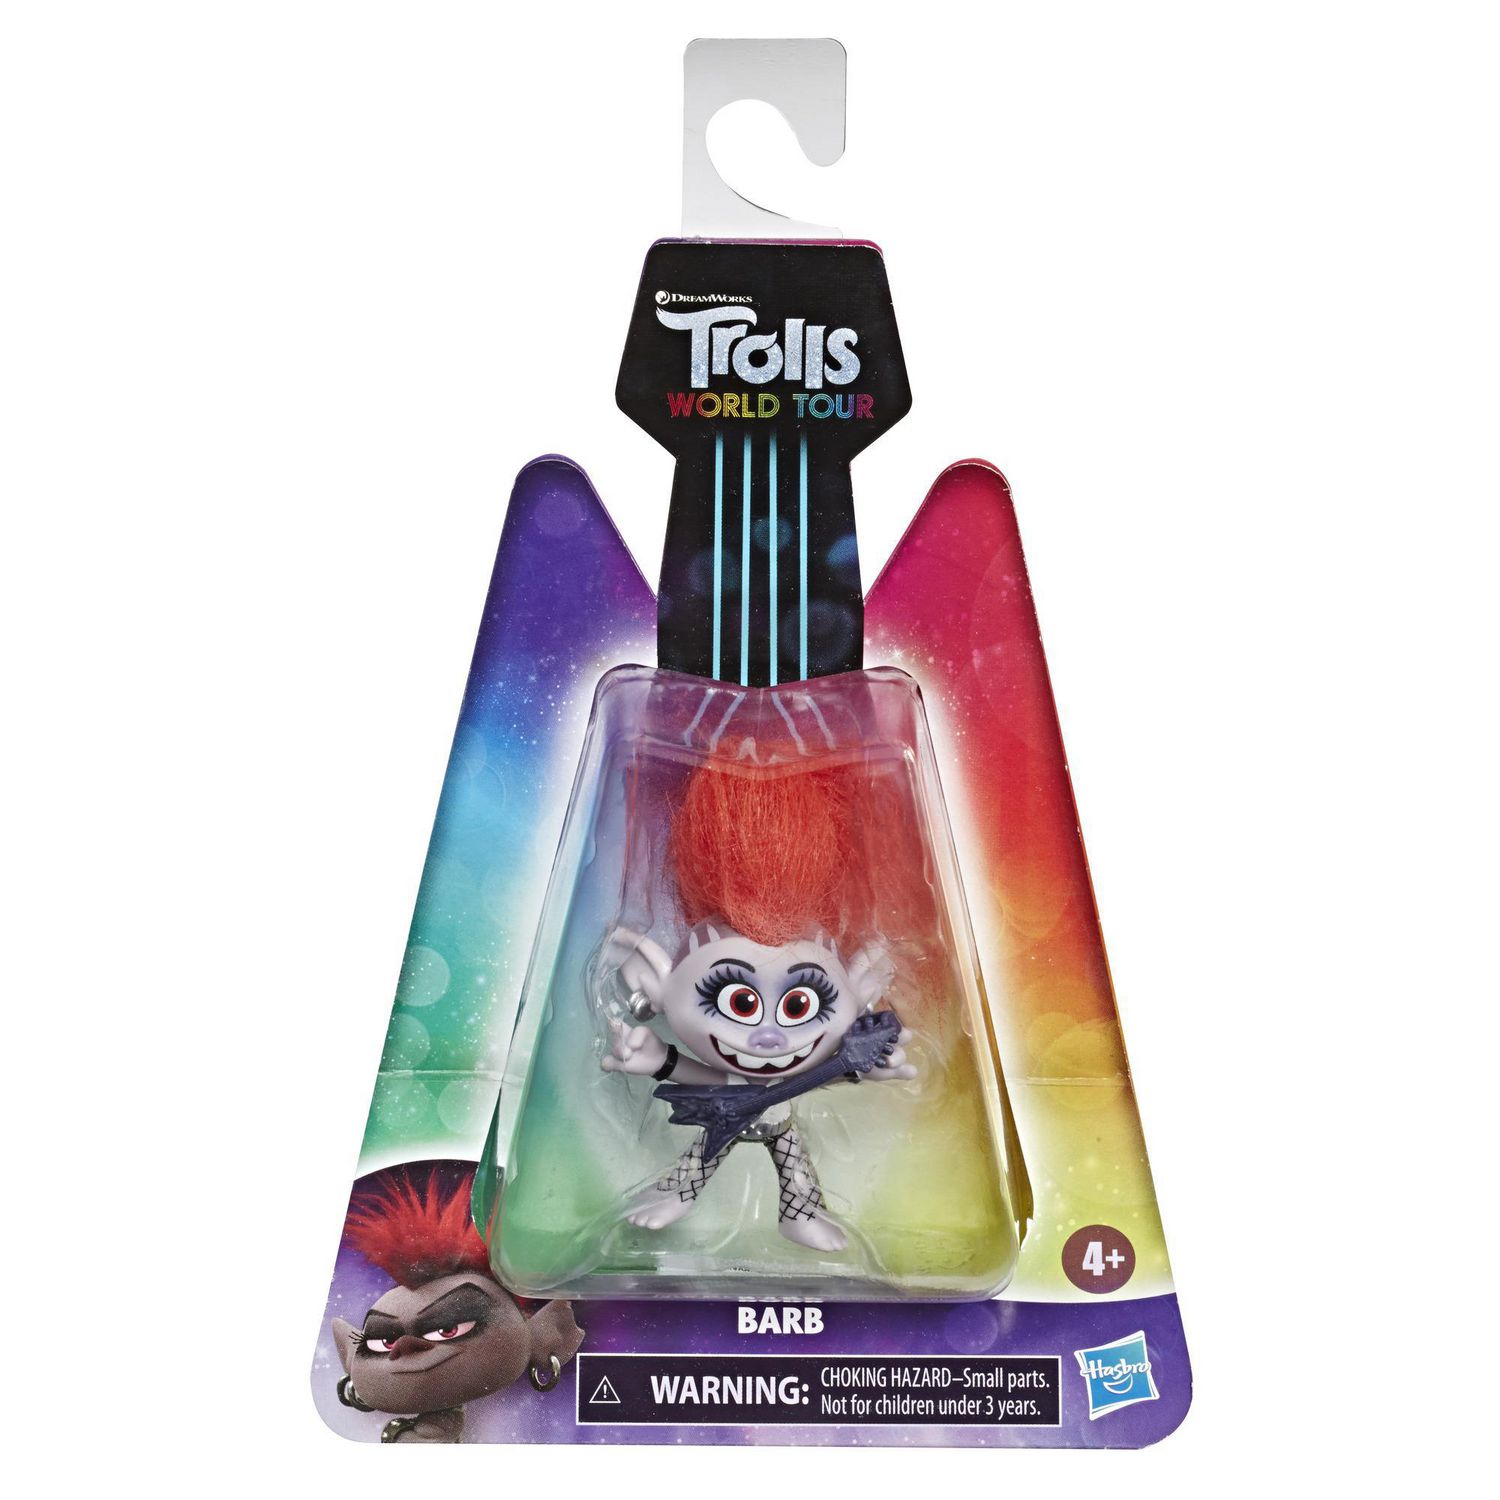 Dreamworks Trolls World Tour Barb Collectible Doll With Guitar Accessory Walmart Canada